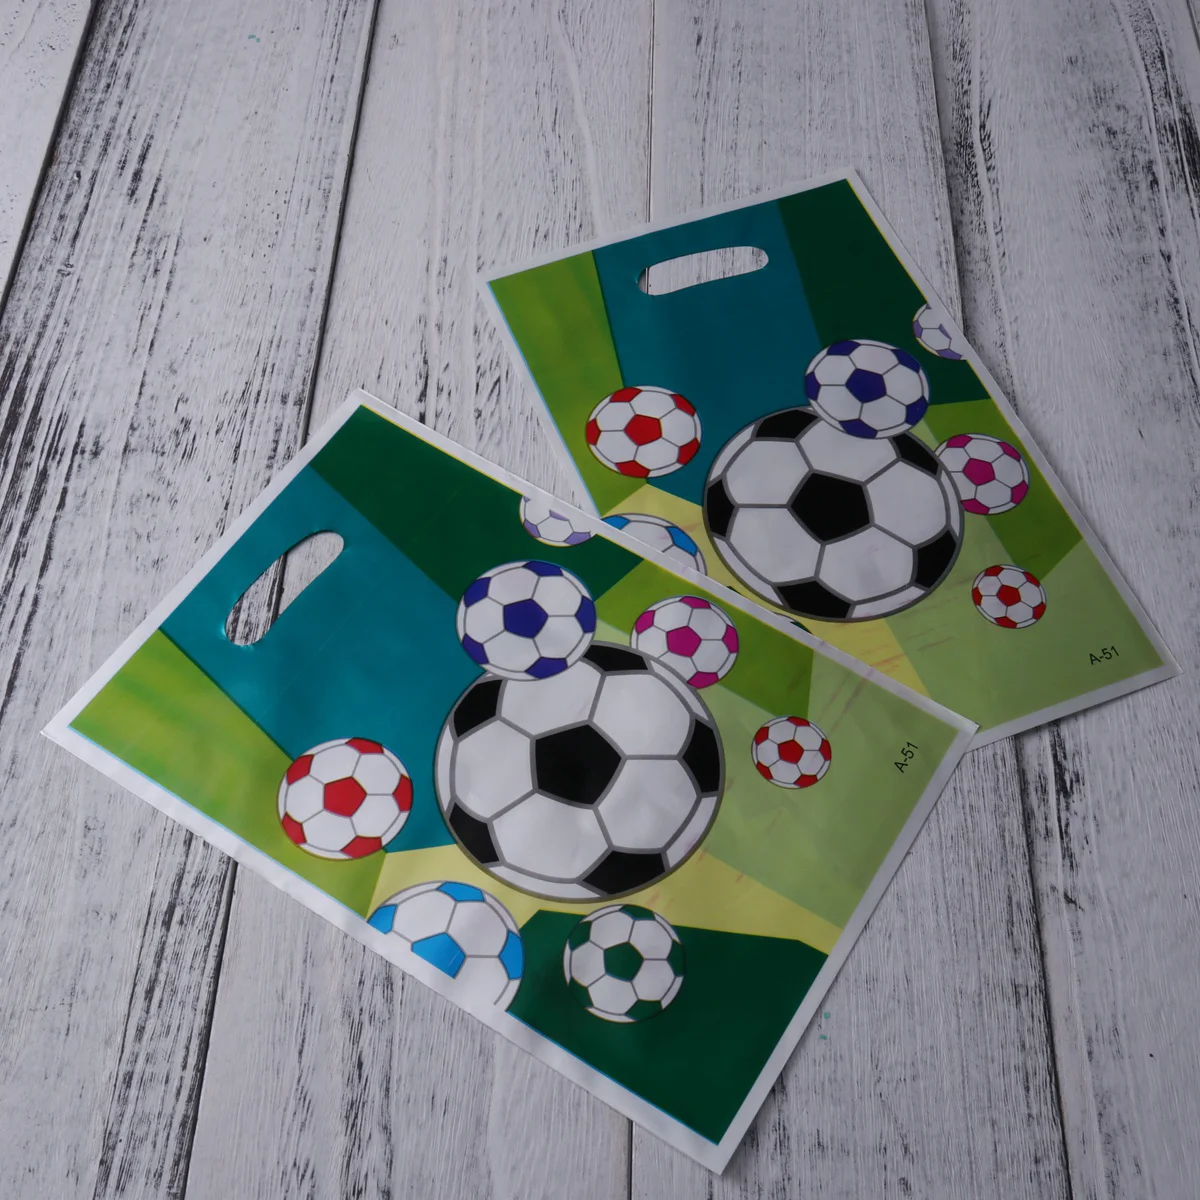 

6pcs Gift Bags Decorative Party Favor Bags Soccer Theme Treat Bags for Kid's Birthday Party